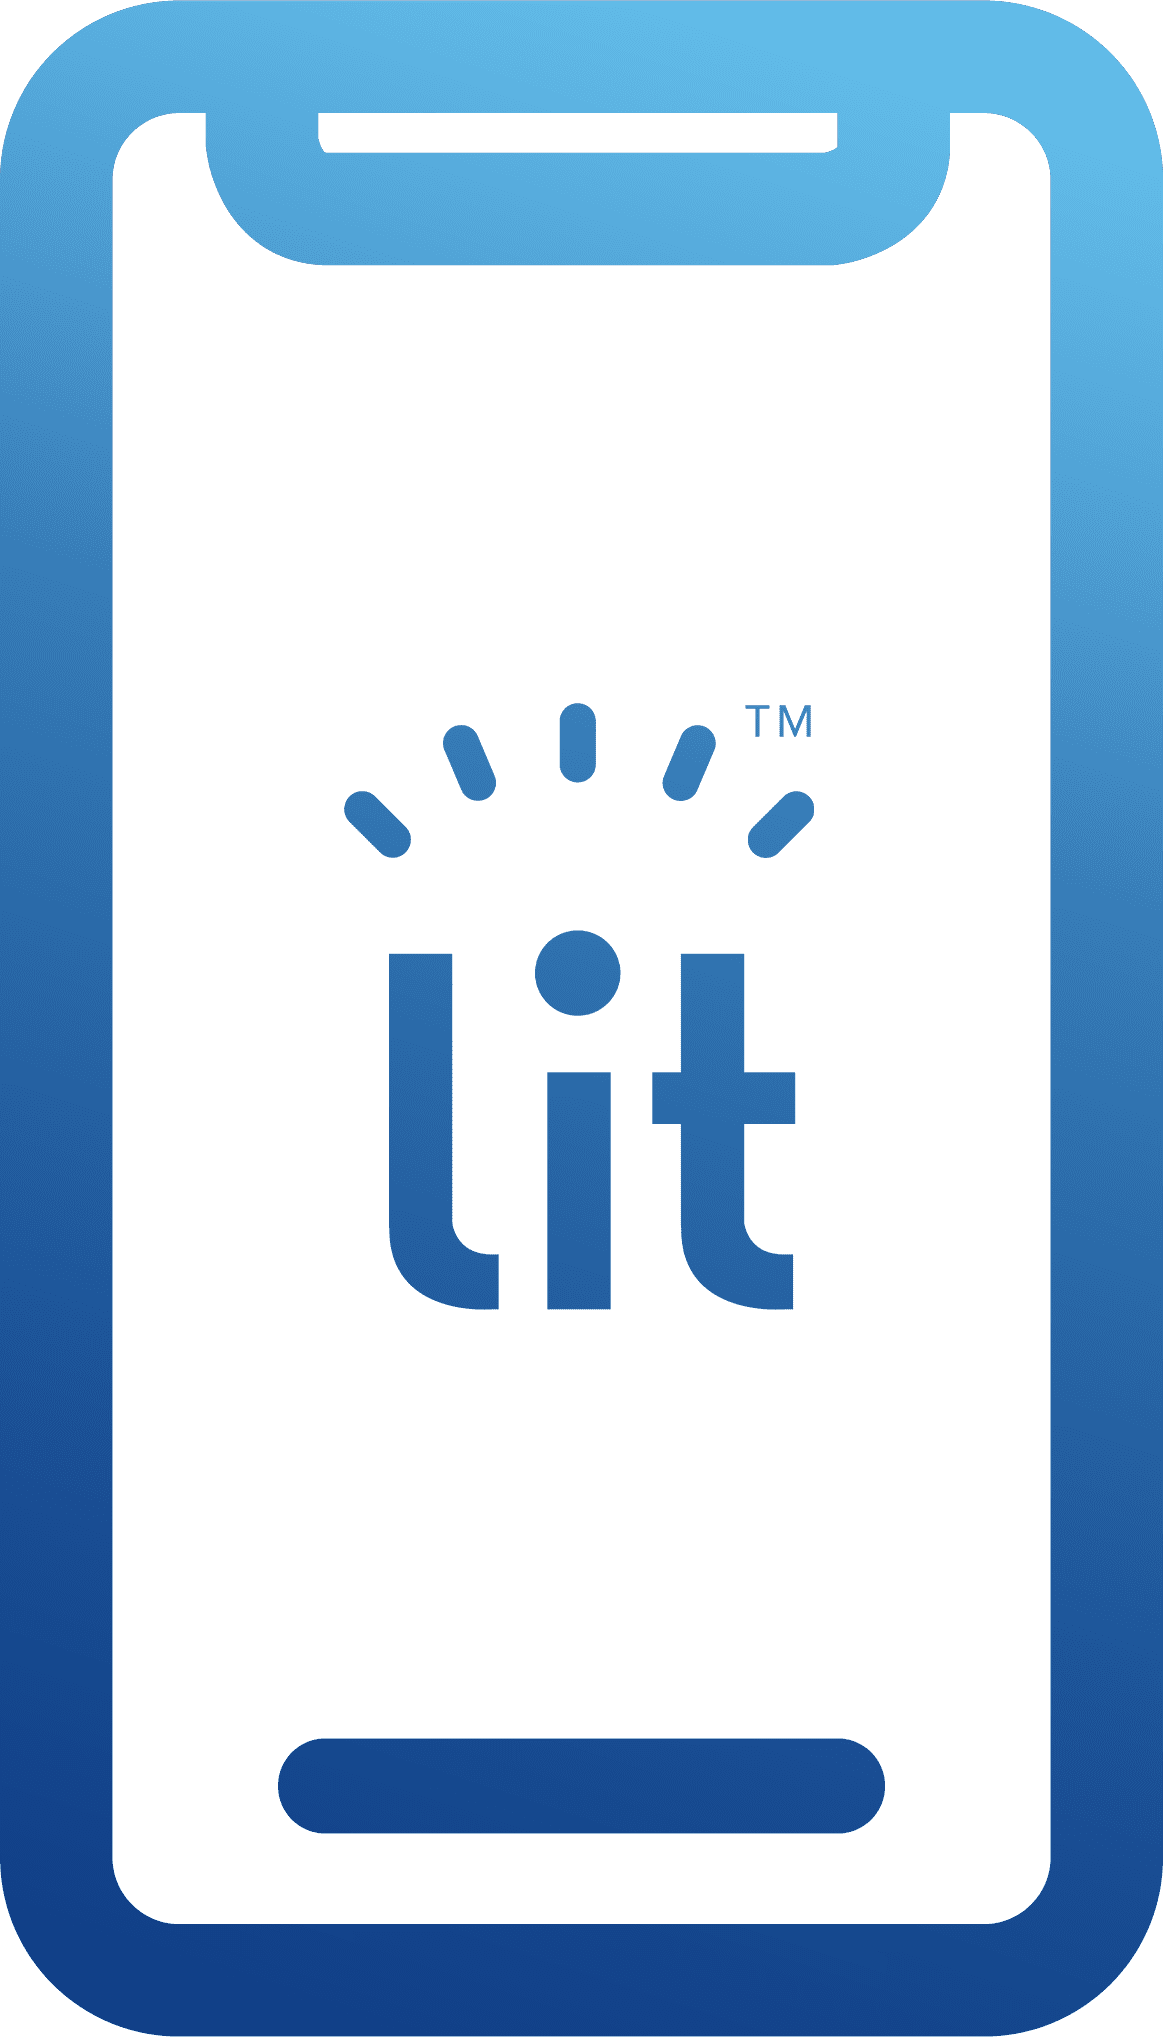 Lit Thinking's software provides indoor air quality monitoring at your finger tips.